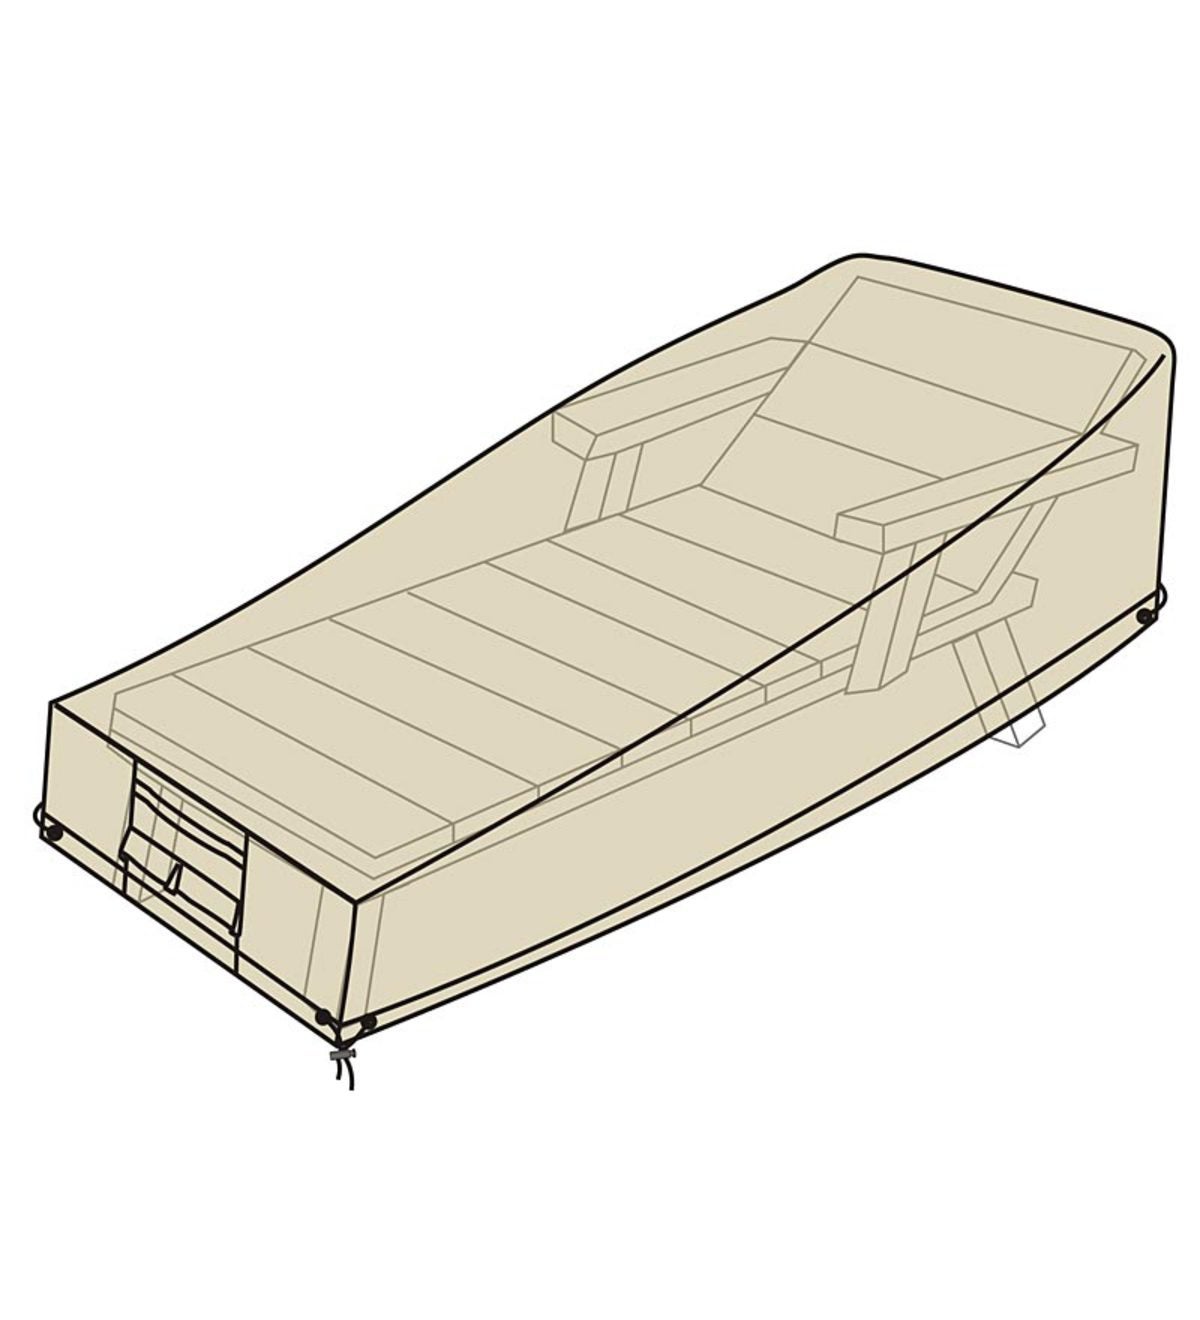 Deluxe Chaise Cover - Tan